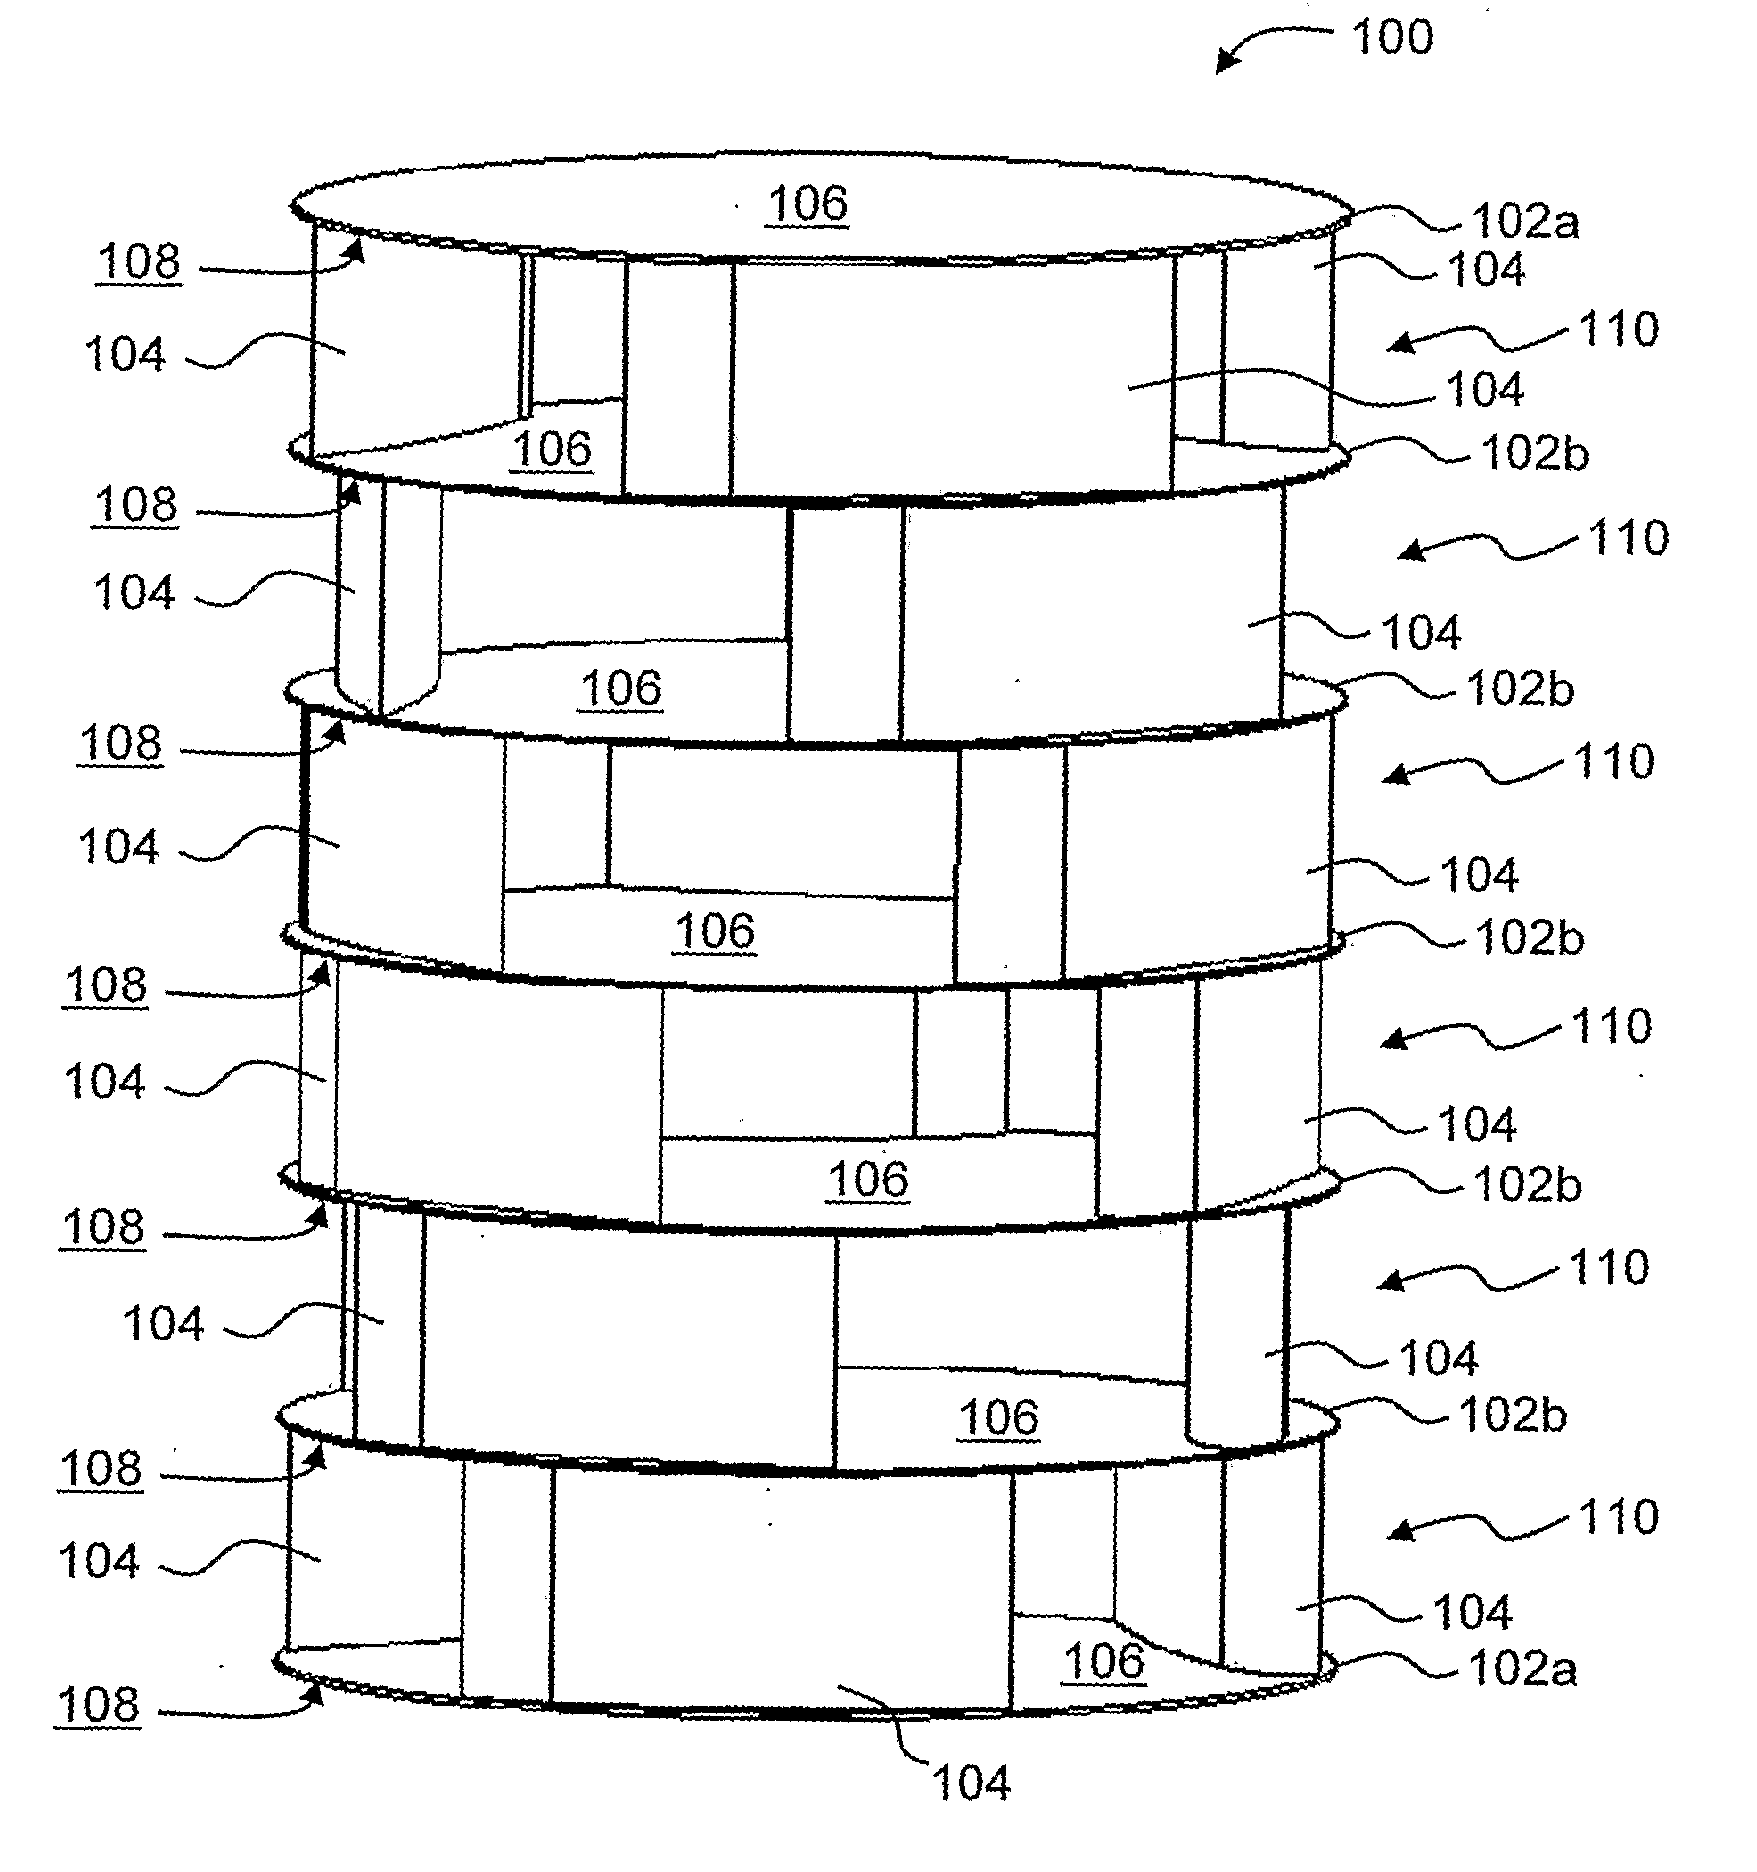 Device and system for extracting tidal energy